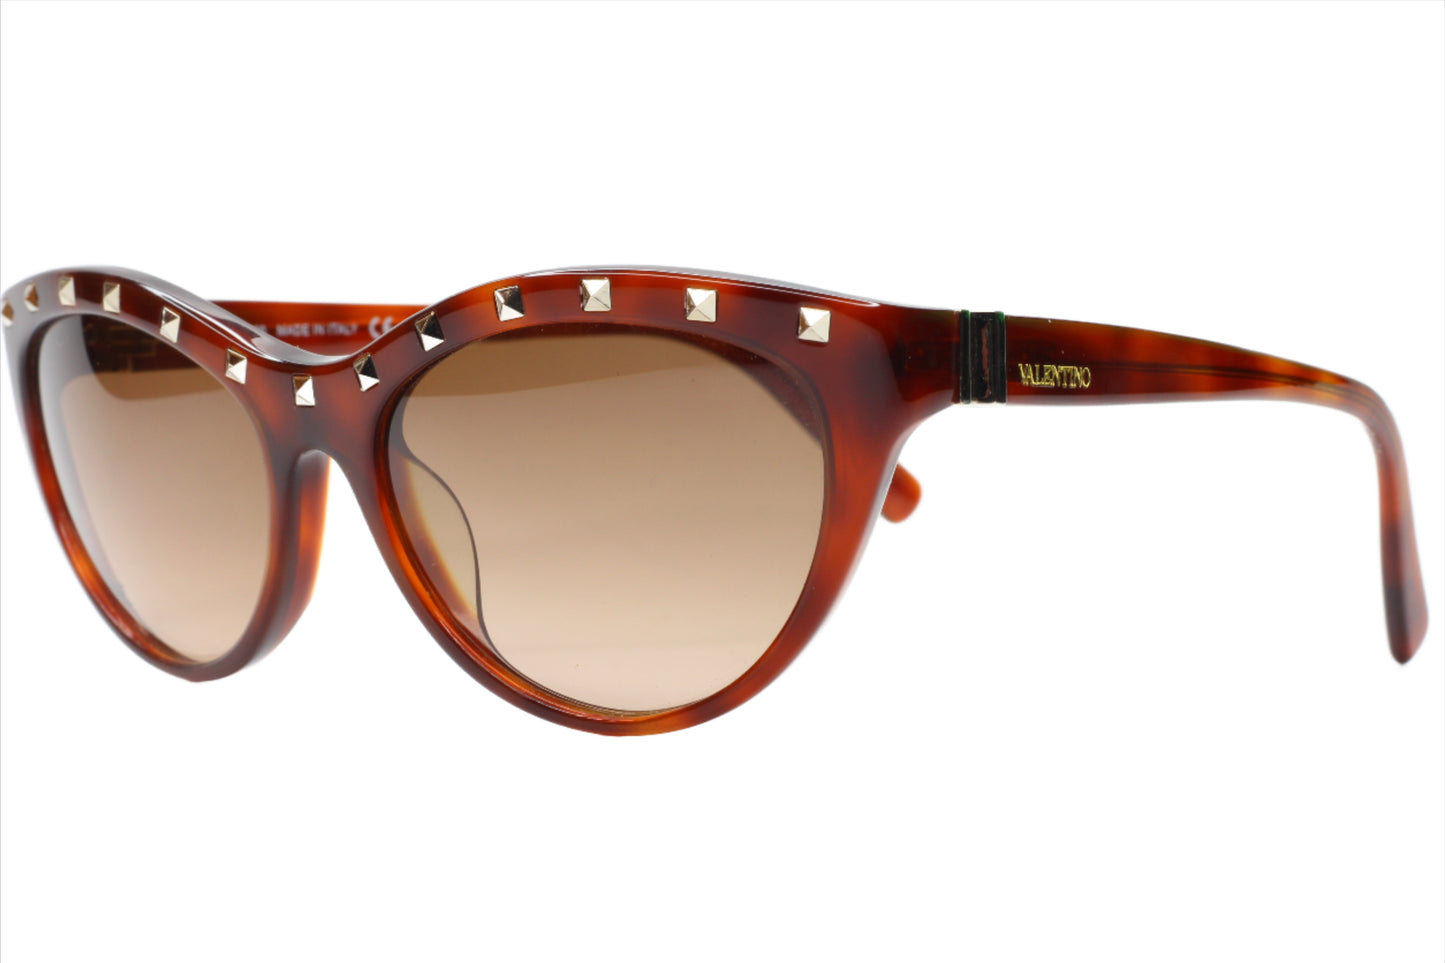 Valentino V641S Brown Designer Silver Studded Acetate Italy Luxury Sunglasses - ABC Optical